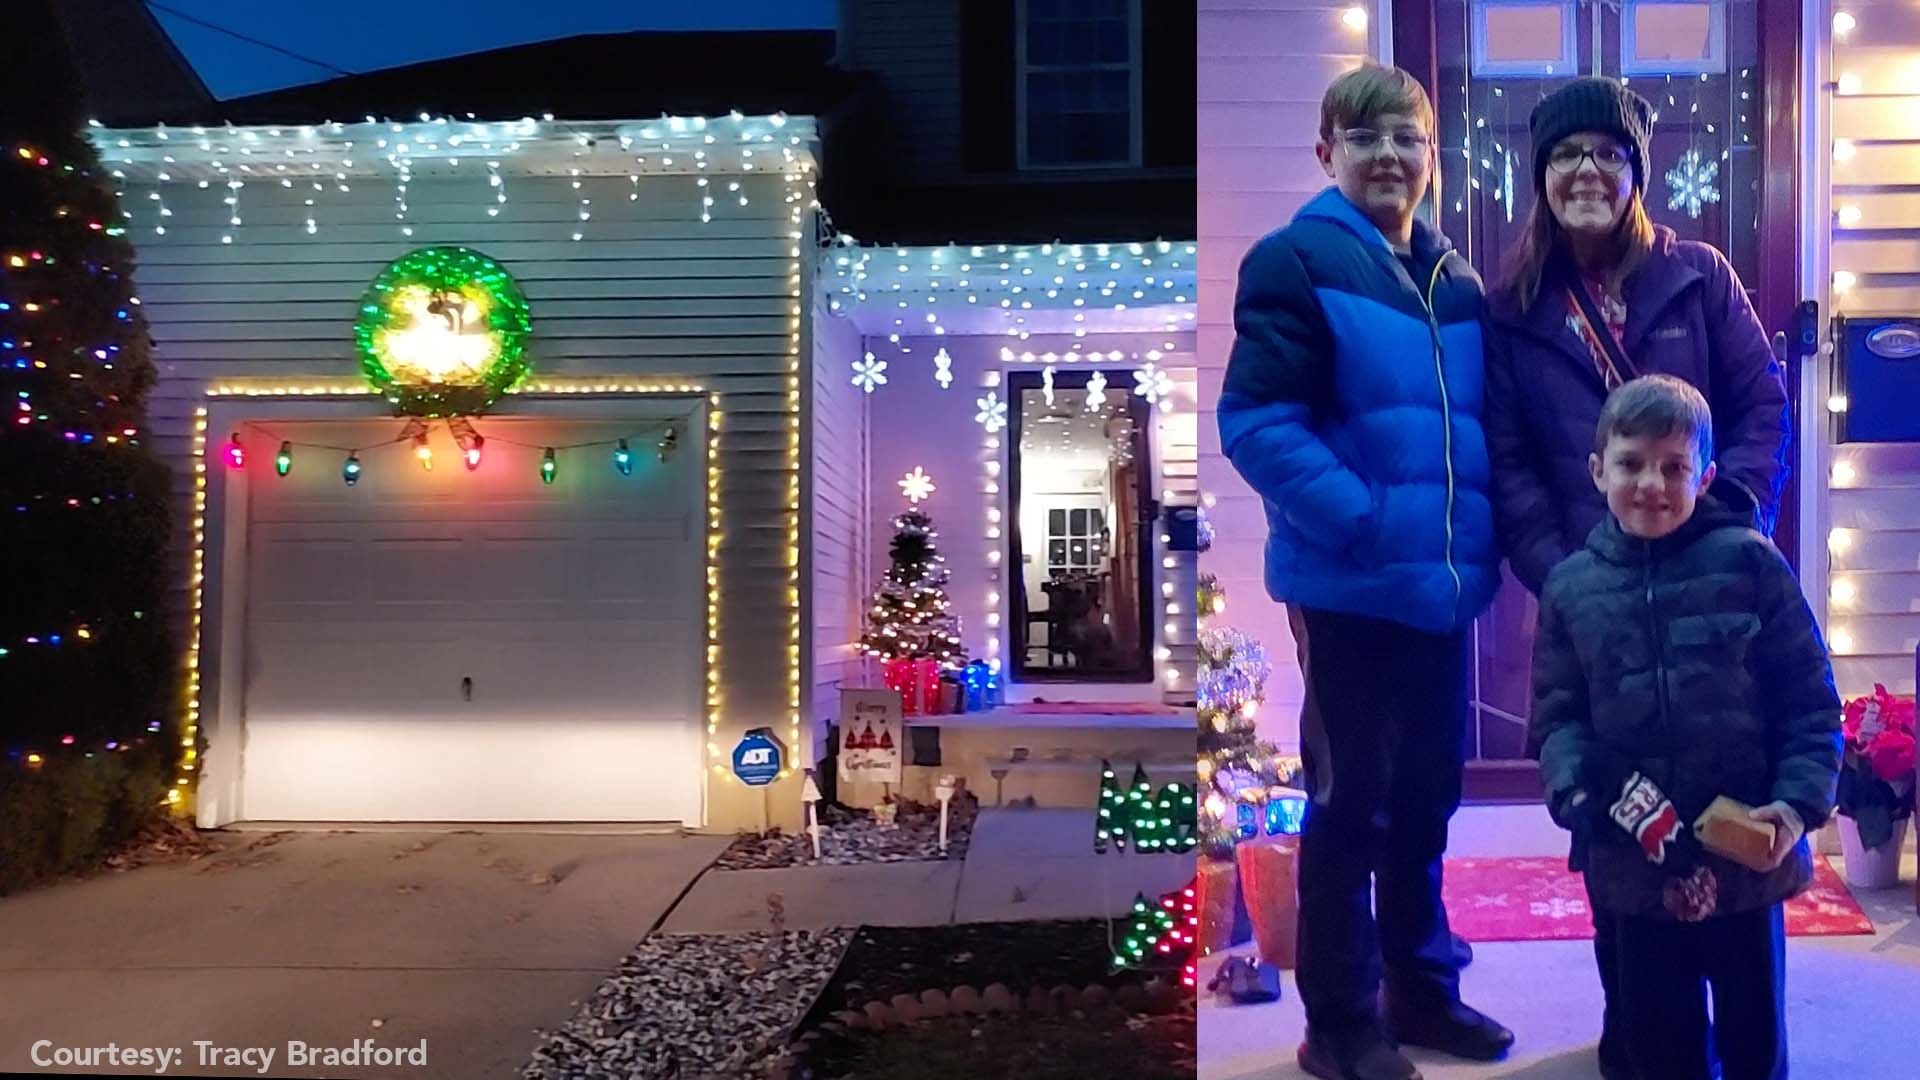 NJ neighbors surprise kids who lost their father with fully